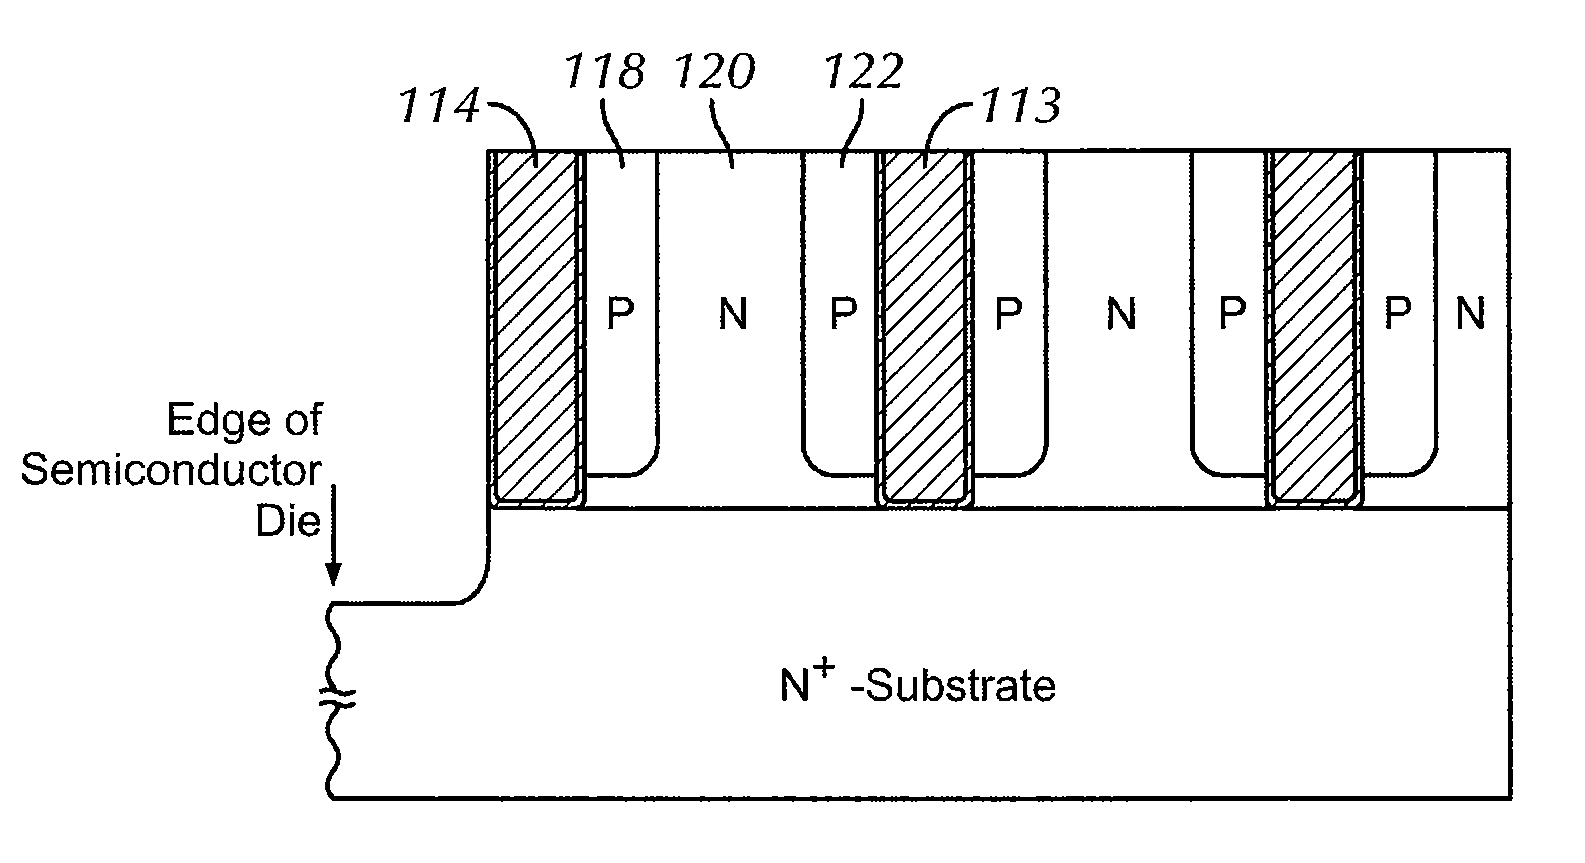 Superjunction device having a dielectric termination and methods for manufacturing the device